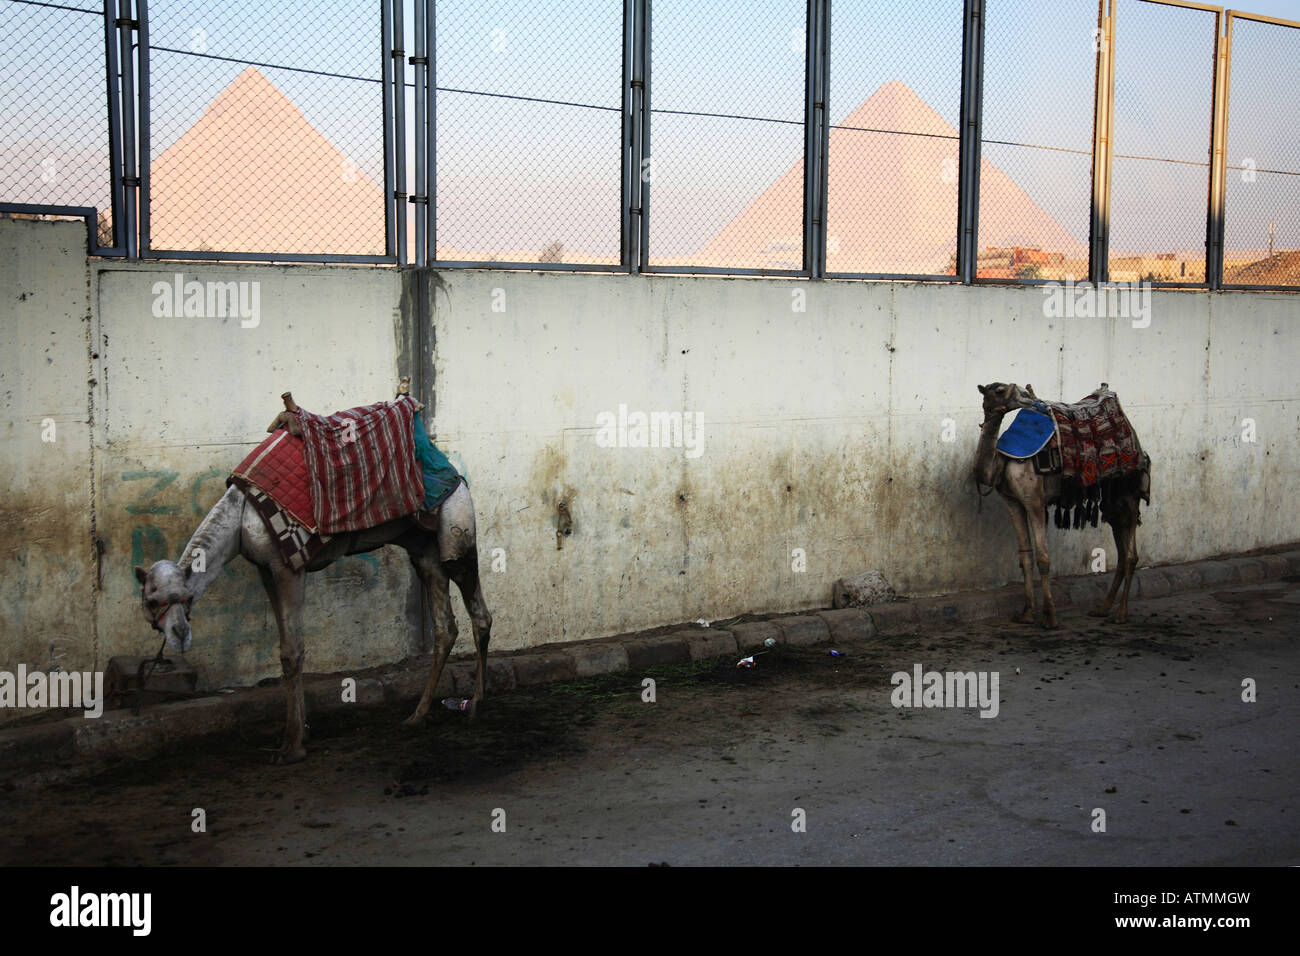 Camels waiting for costumers early in the morning in Giza. Stock Photo